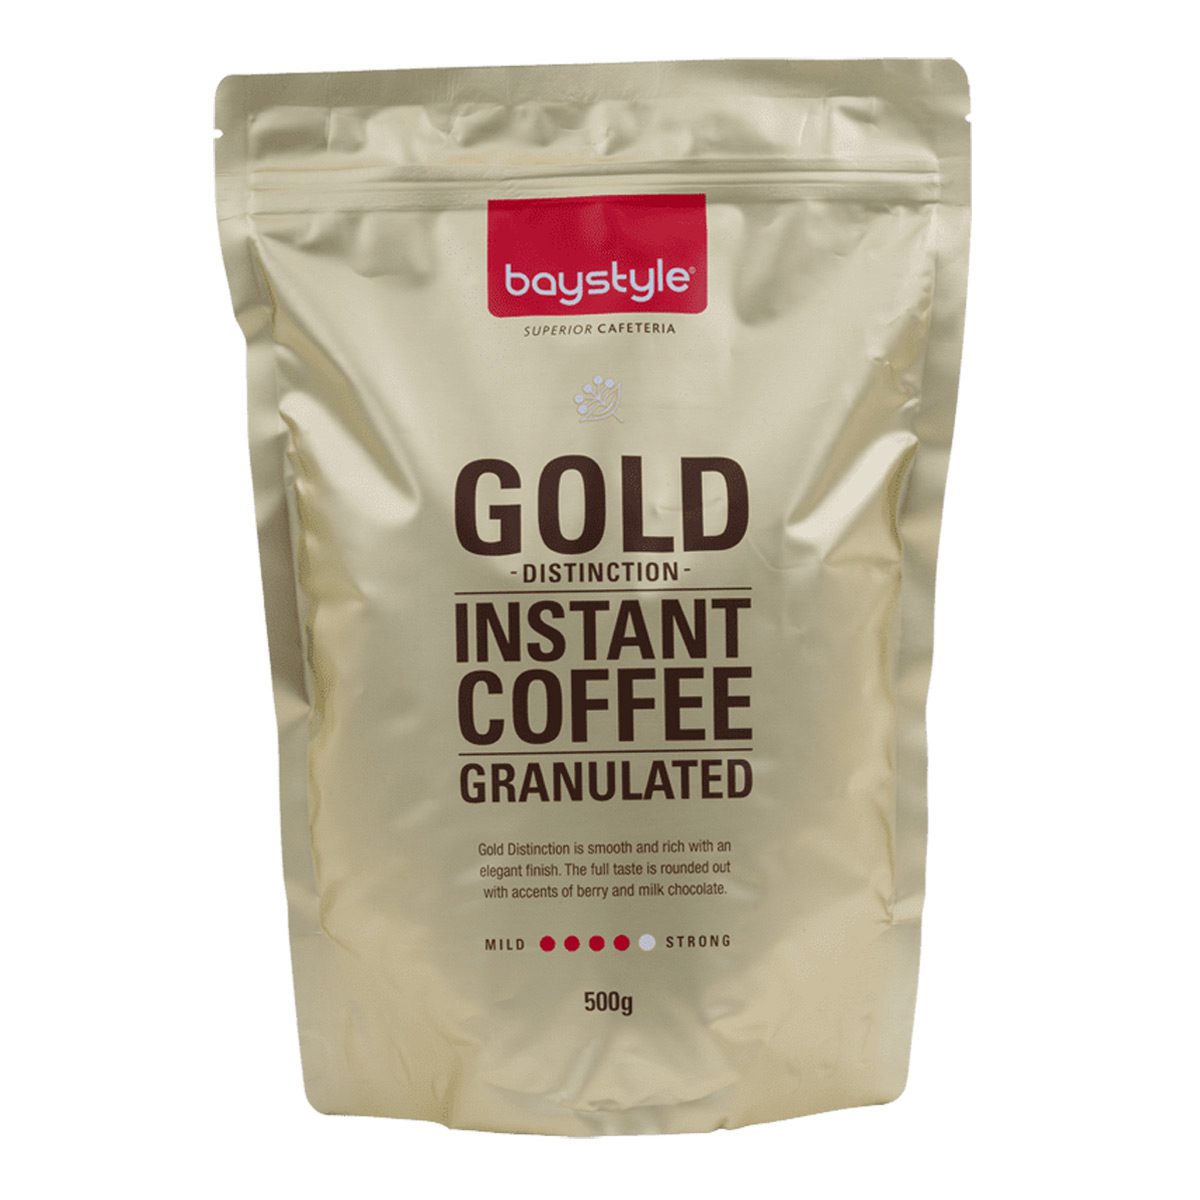 consumables-hospitality-beverage-food-baystyle-gold-granulated-coffee-500gm-high-quality-granulated-instant-coffee-delivers-full-flavoured-classic-style-vjs-distributors-BAYGOLD